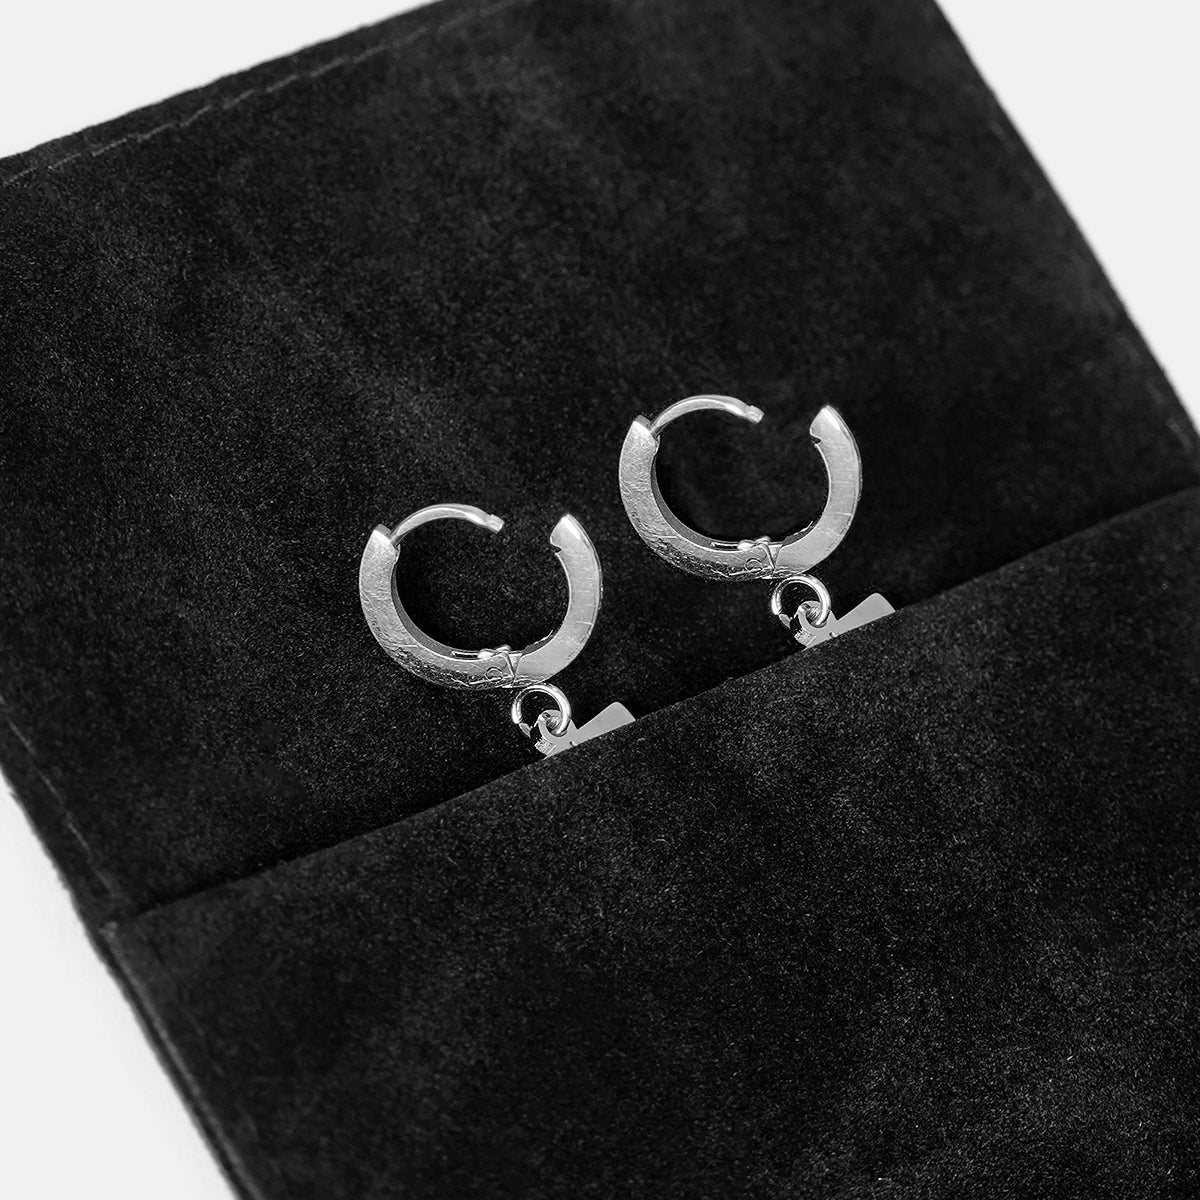 91 Number Earring - Stainless Steel